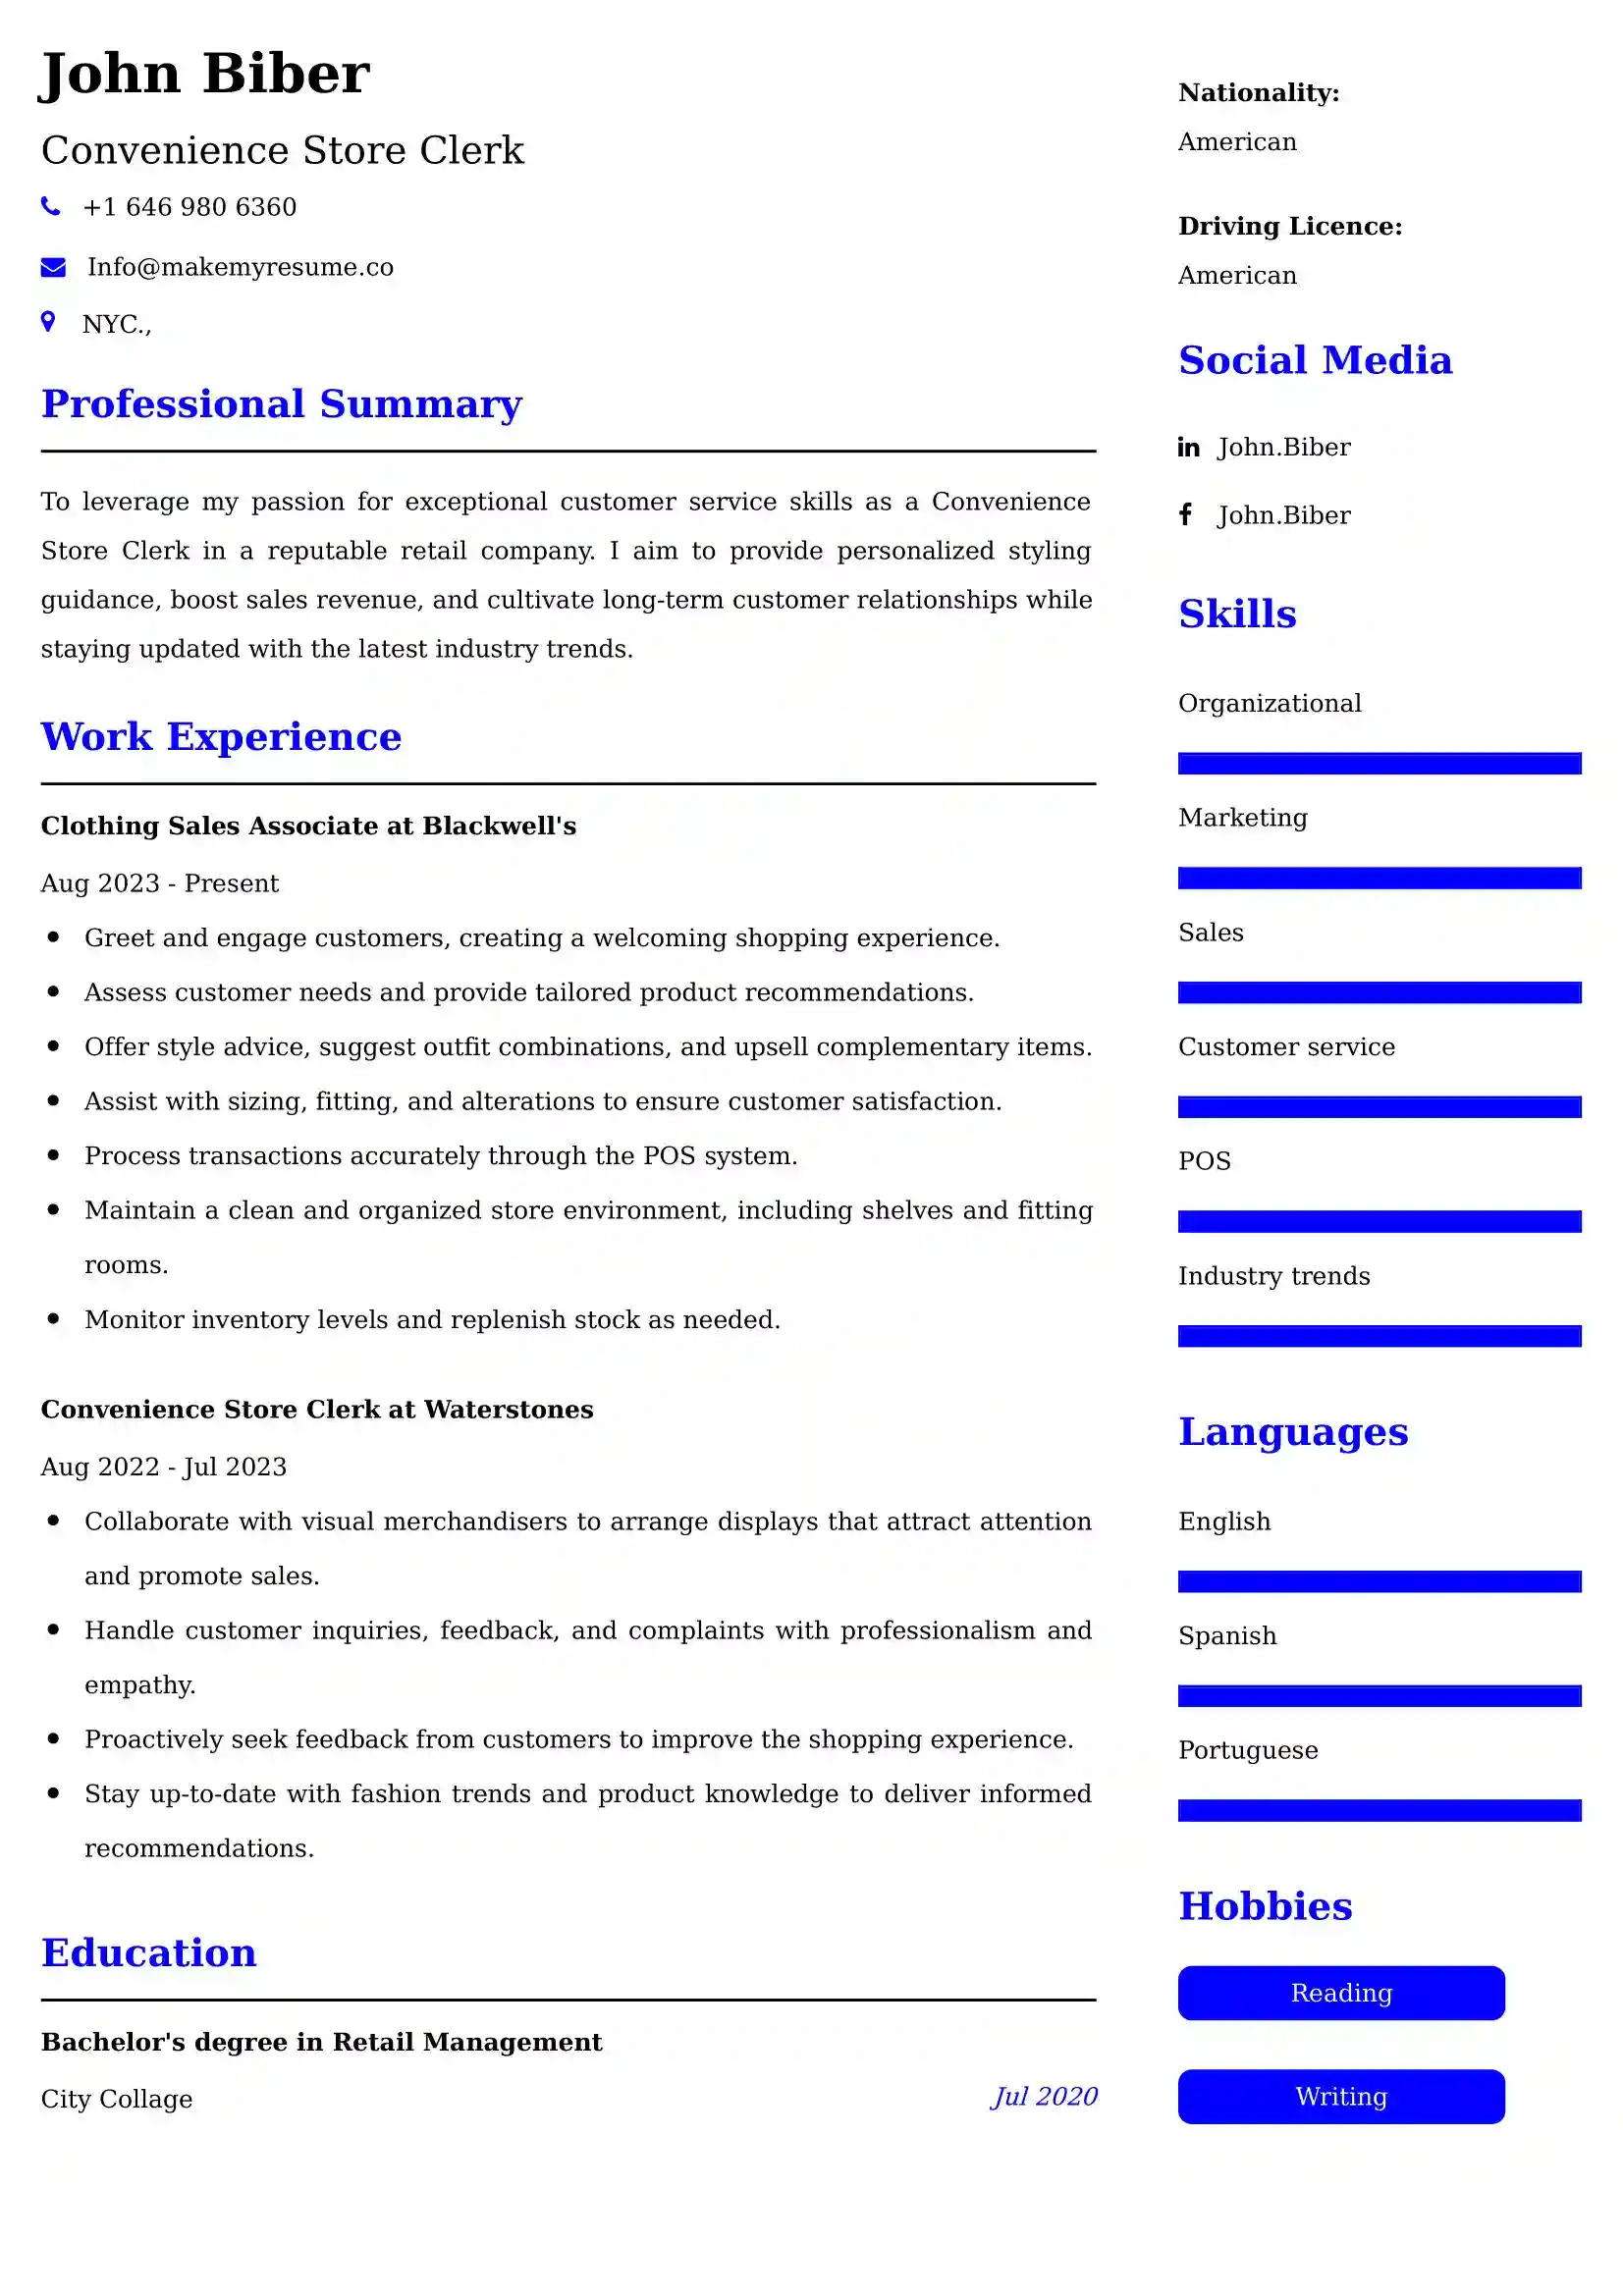 Convenience Store Clerk Resume Examples for UK Jobs - Tips and Guide